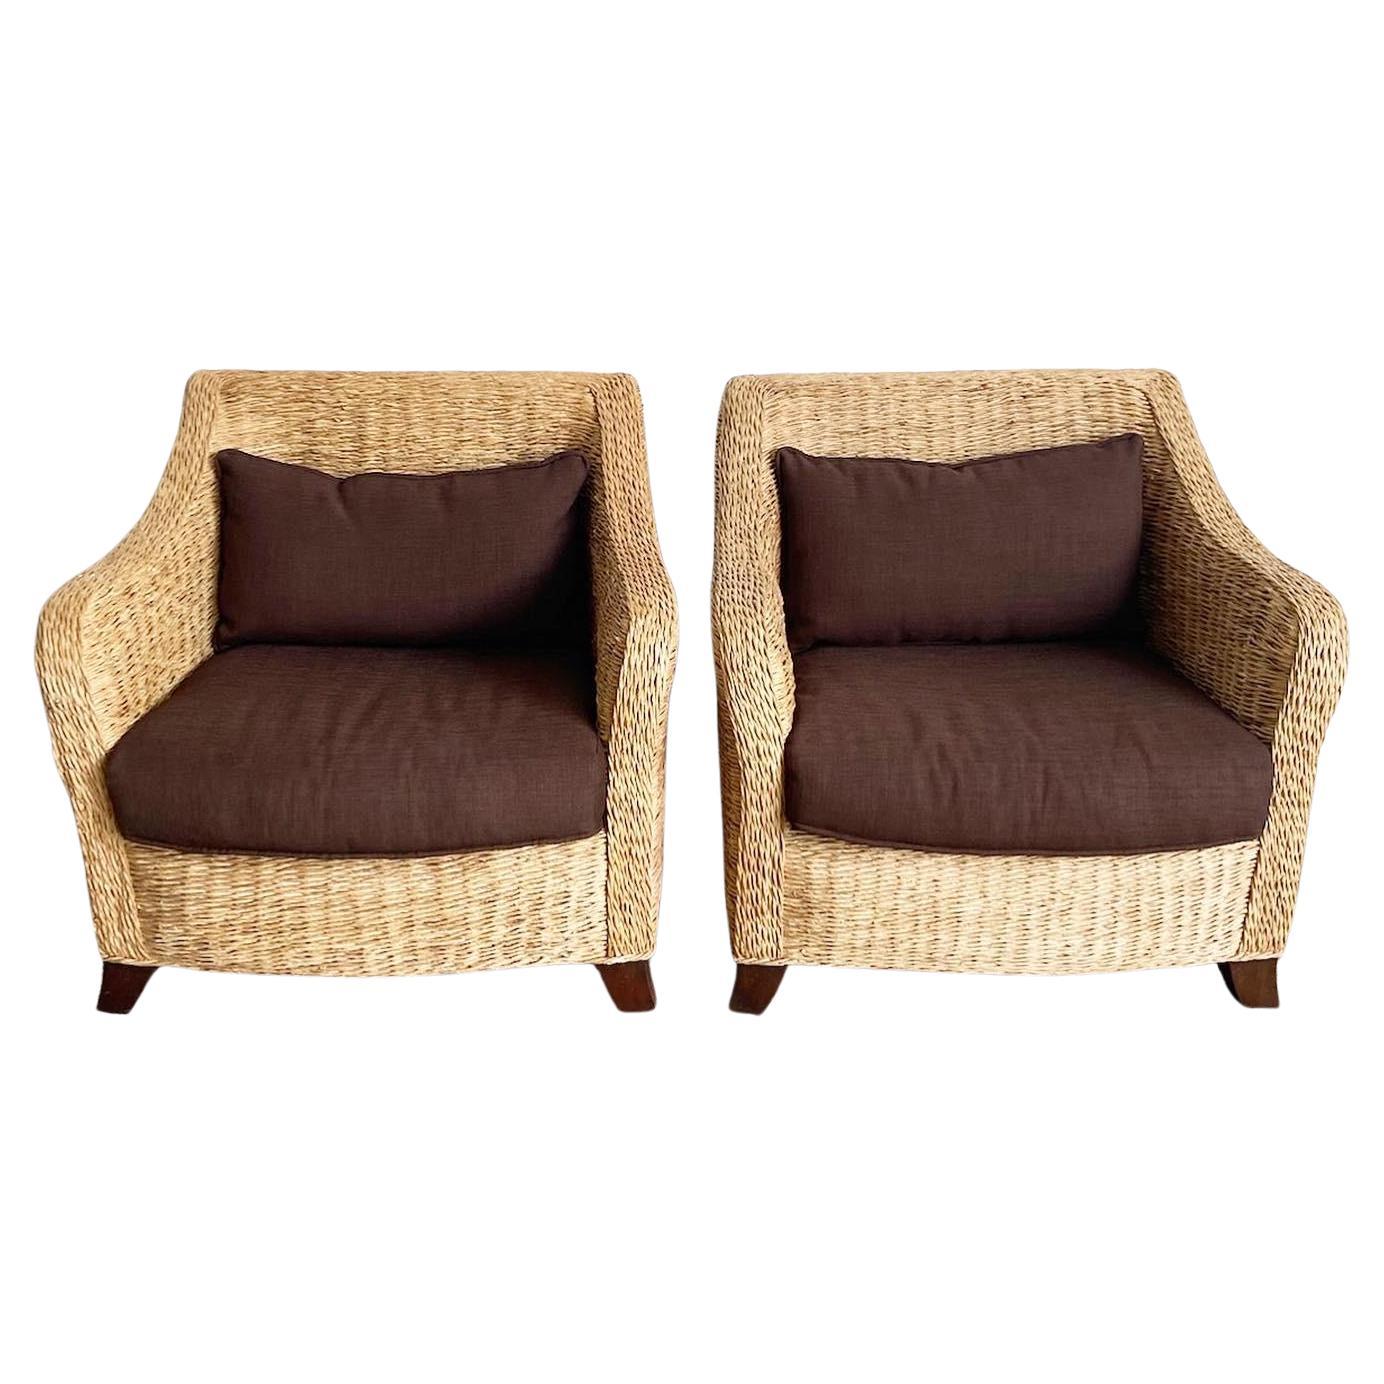 Boho Chic Wicker Arm Chairs With Brown Cushions For Sale